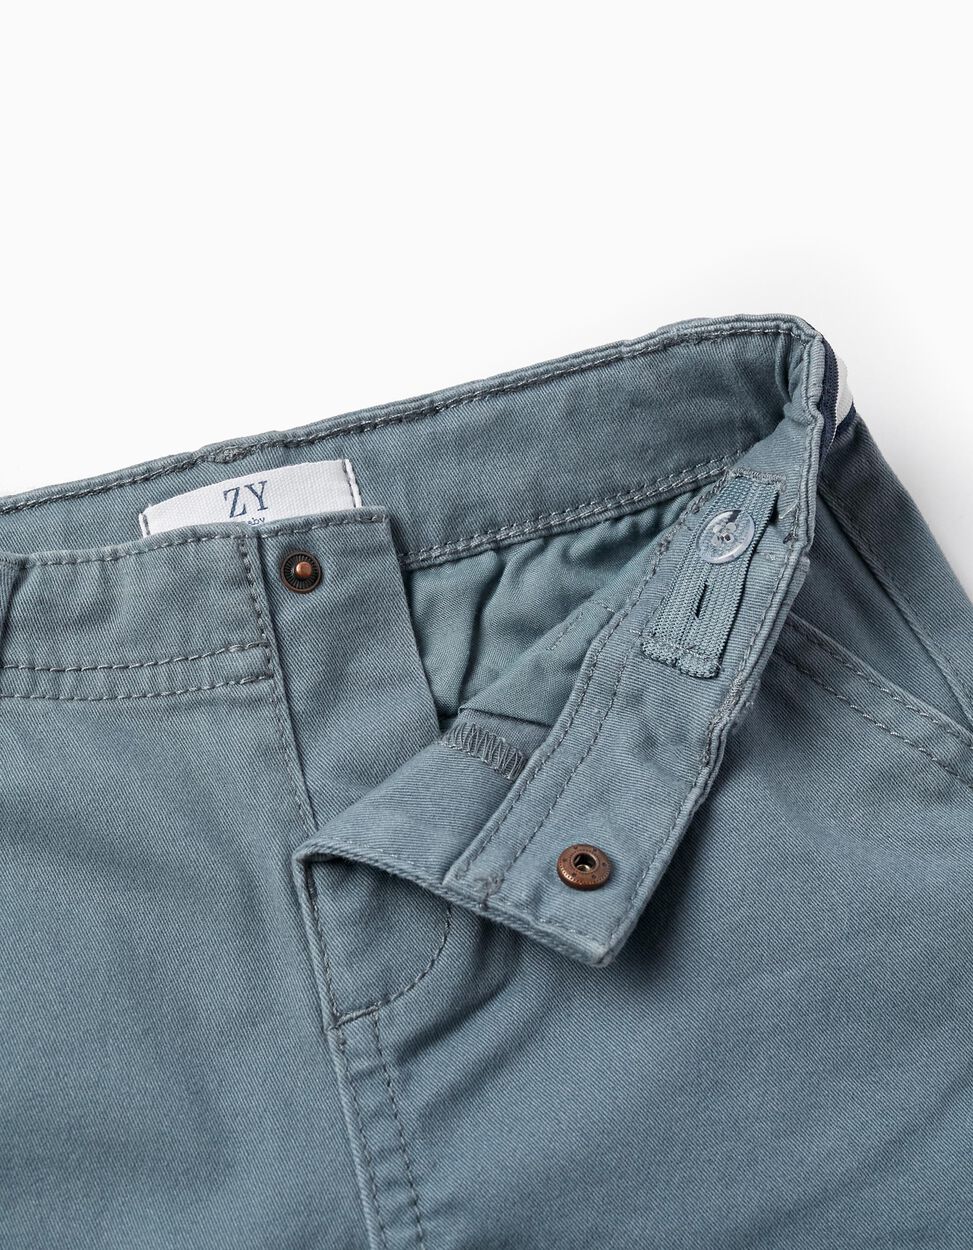 Buy Online Twill Chino Shorts for Baby Boys, Blue